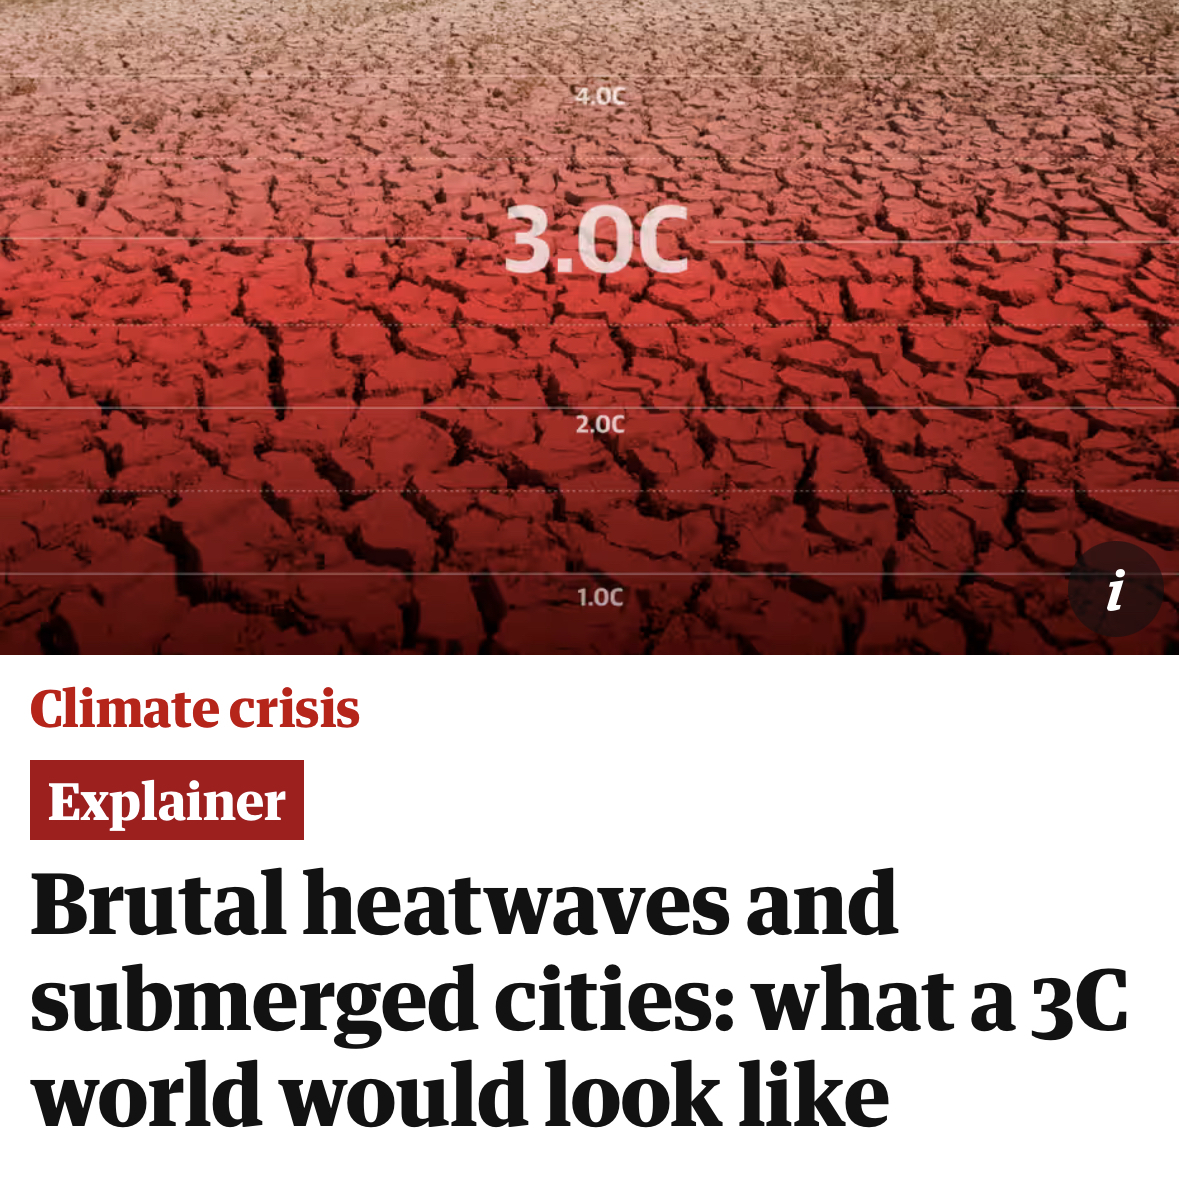 Scientists are warning of 'catastrophic levels' of global heating if we don't stop fossil fuels, while Equinor continues to push for new fields like Rosebank. Every tonne of CO2 avoided will reduce suffering and increase our chances of a liveable future. We must #StopRosebank.